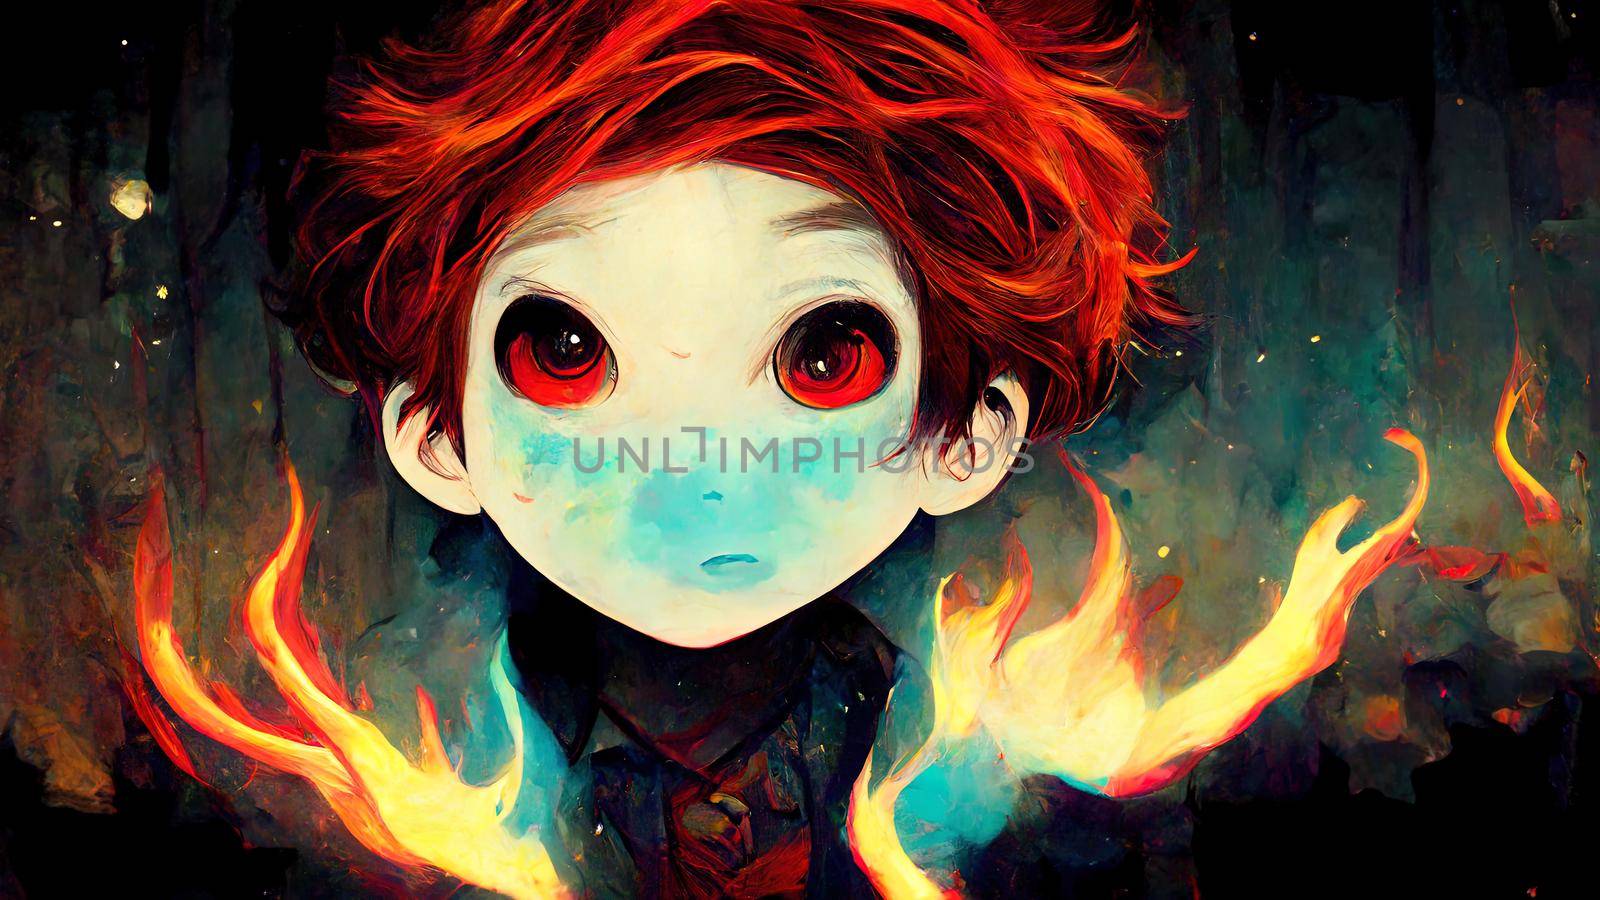 Beautiful anime boy character ,flames in hand. High quality illustration